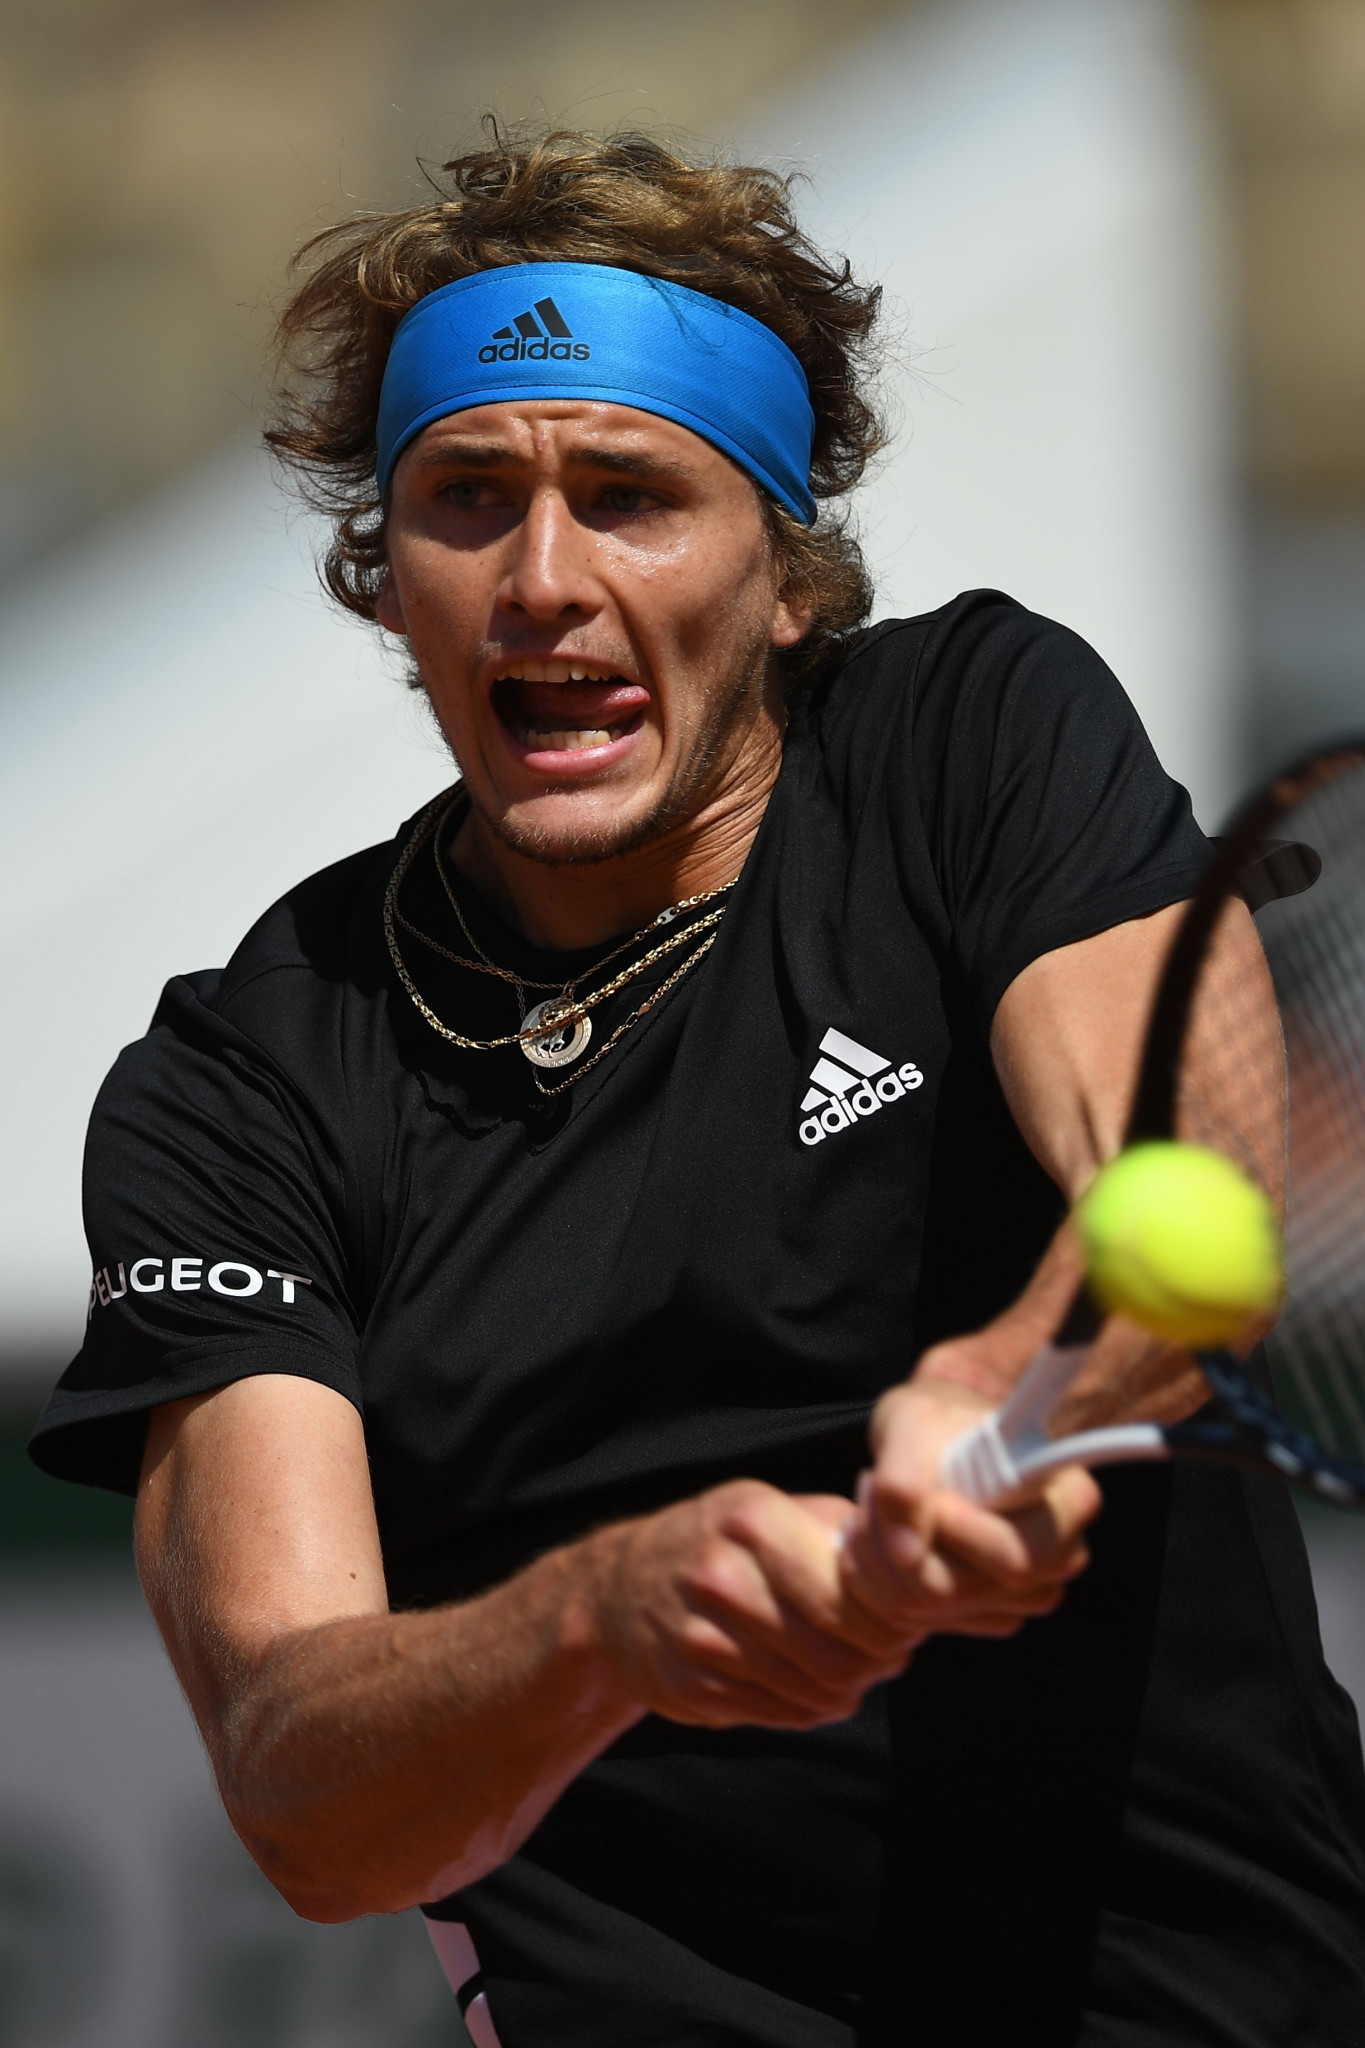 Germany's Alexander Zverev needed full focus in a gruelling French Open match with Serbian Dusan Lajovic ©Getty Images